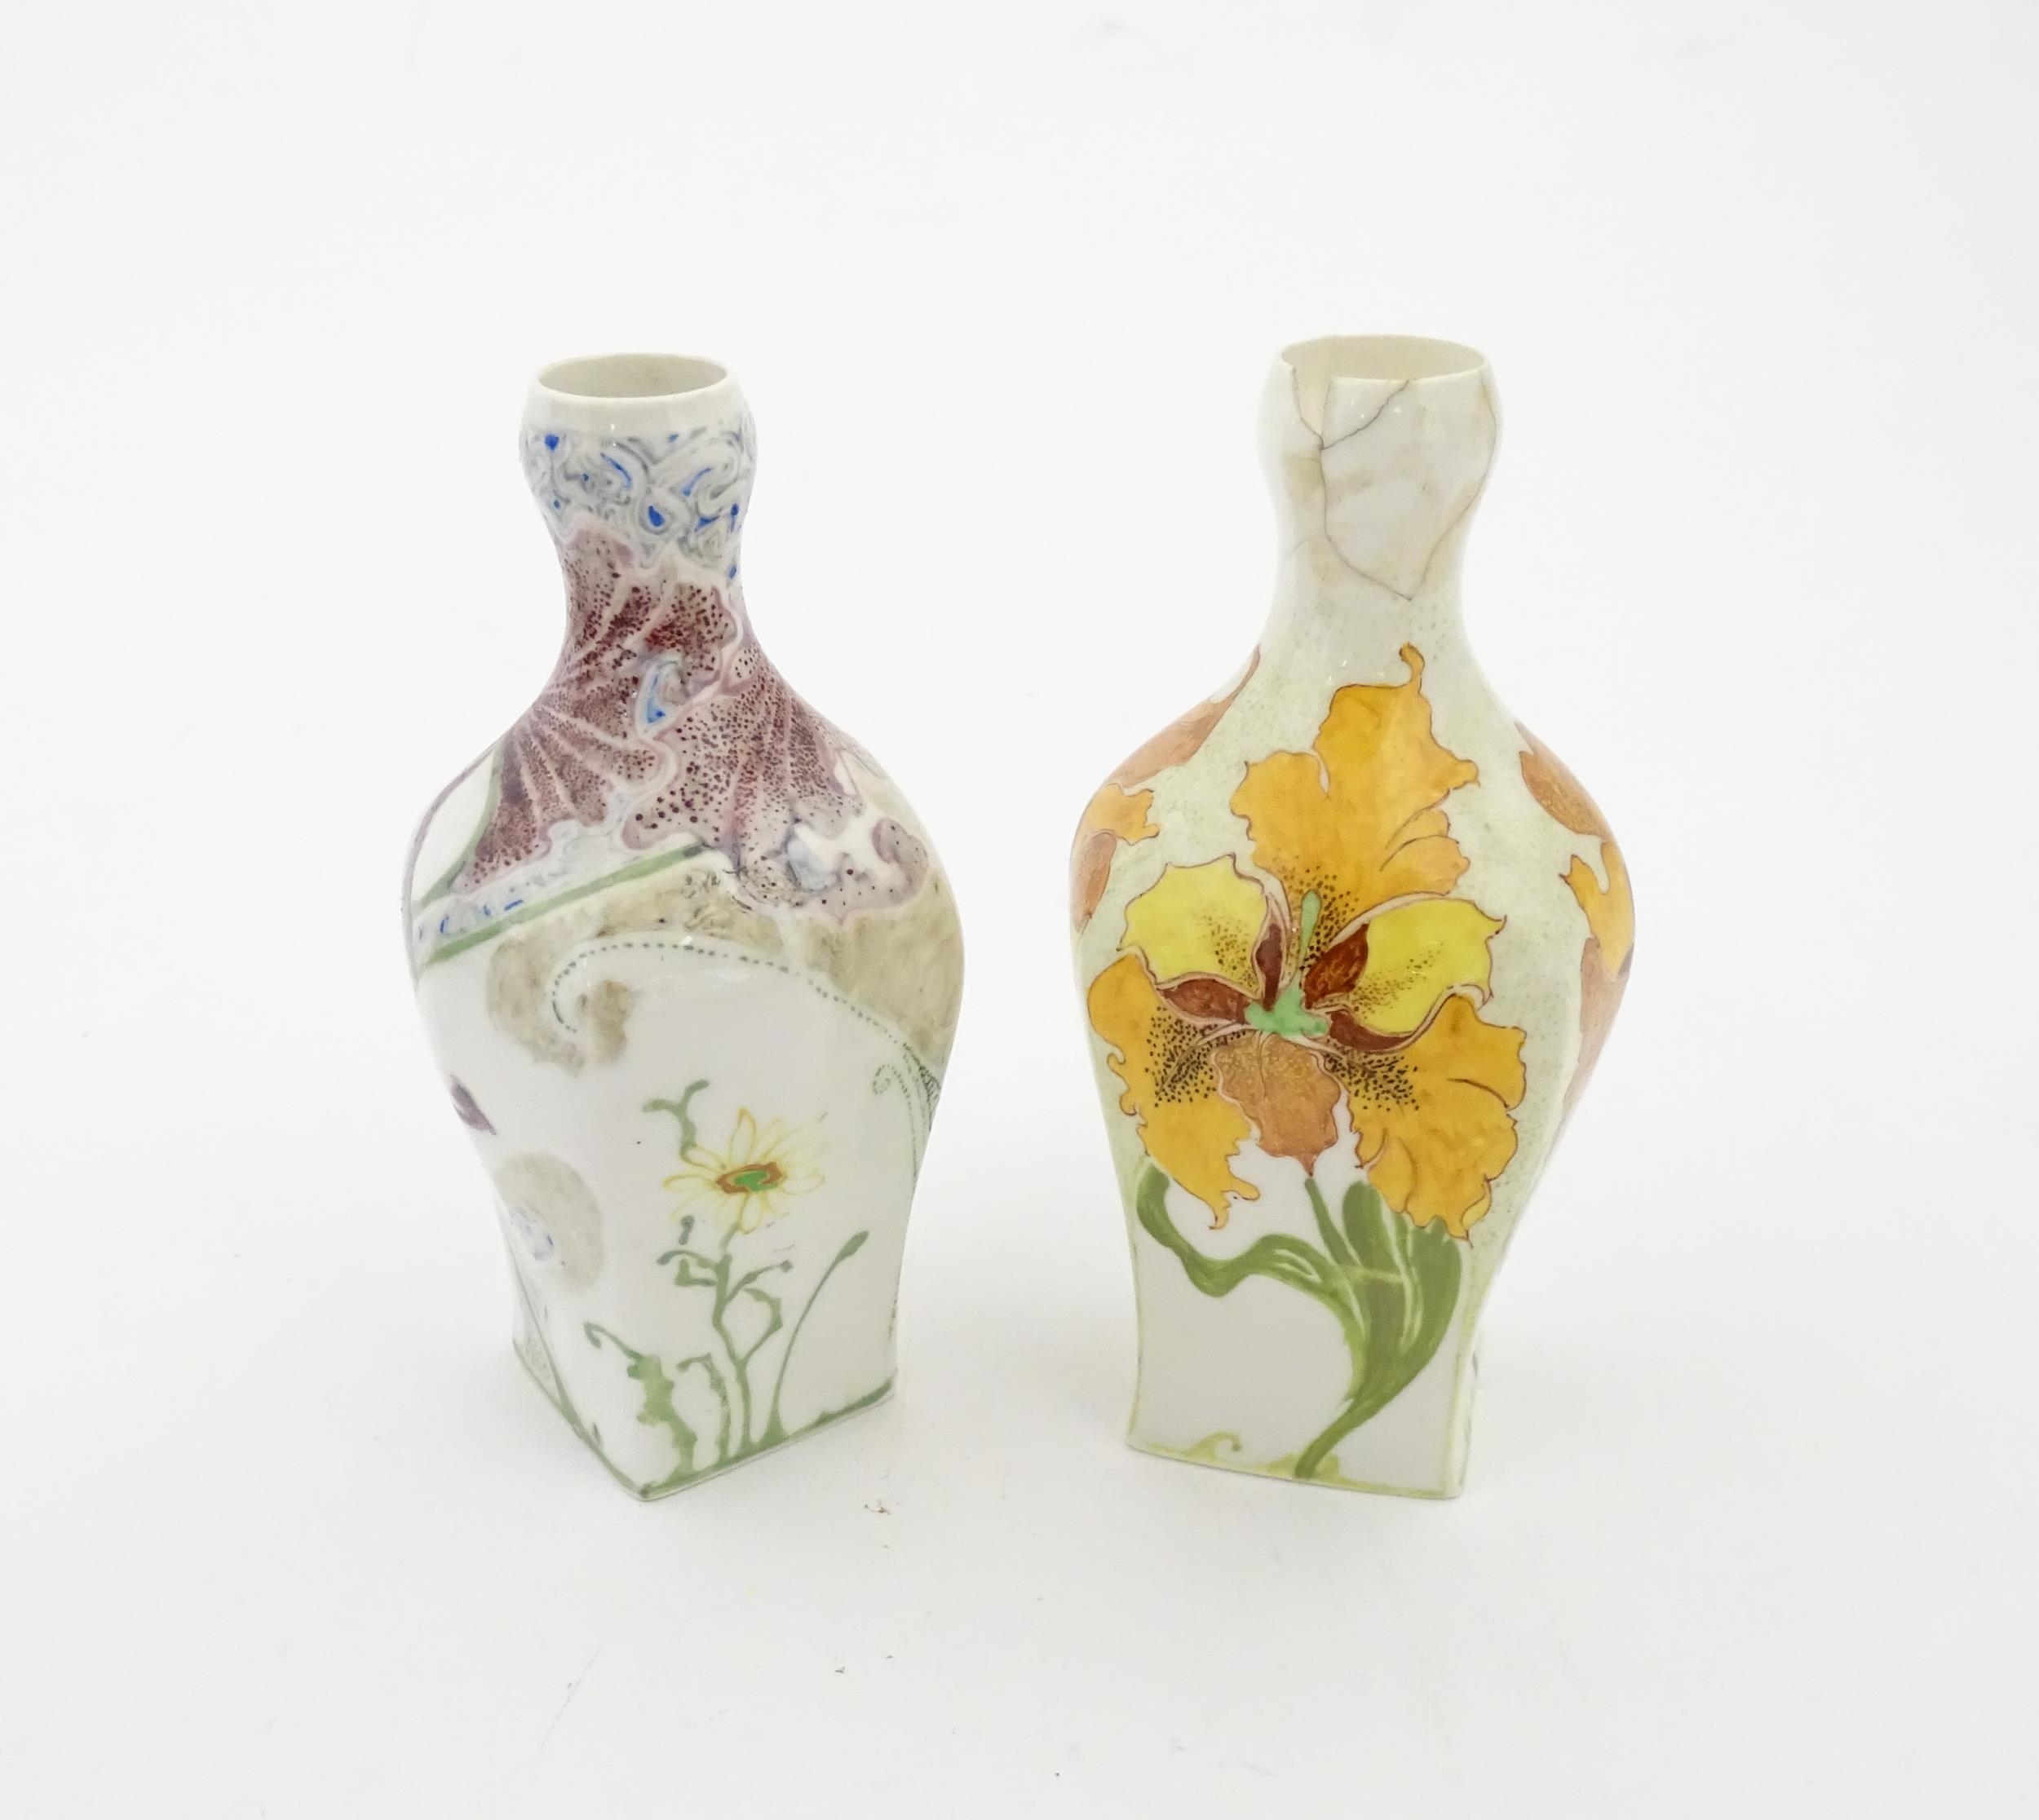 Two Rozenburg eggshell porcelain vases, one decorated with purple flowers, the other with orange - Image 7 of 8